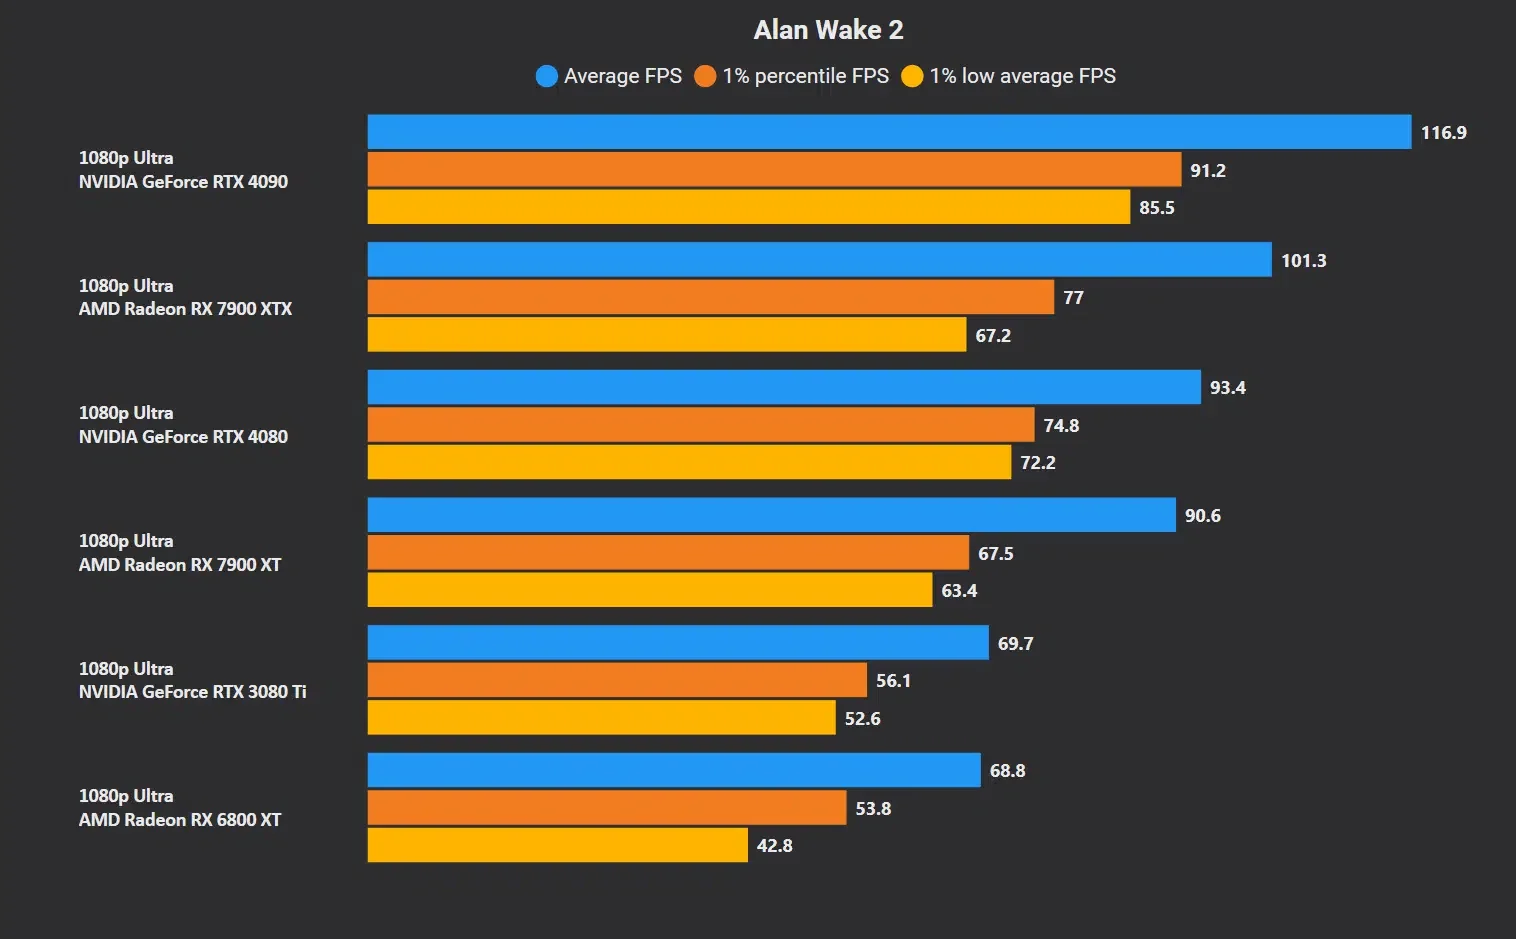 How Well Does Alan Wake 2 Run on Top GPUs? Surprising Results Revealed!